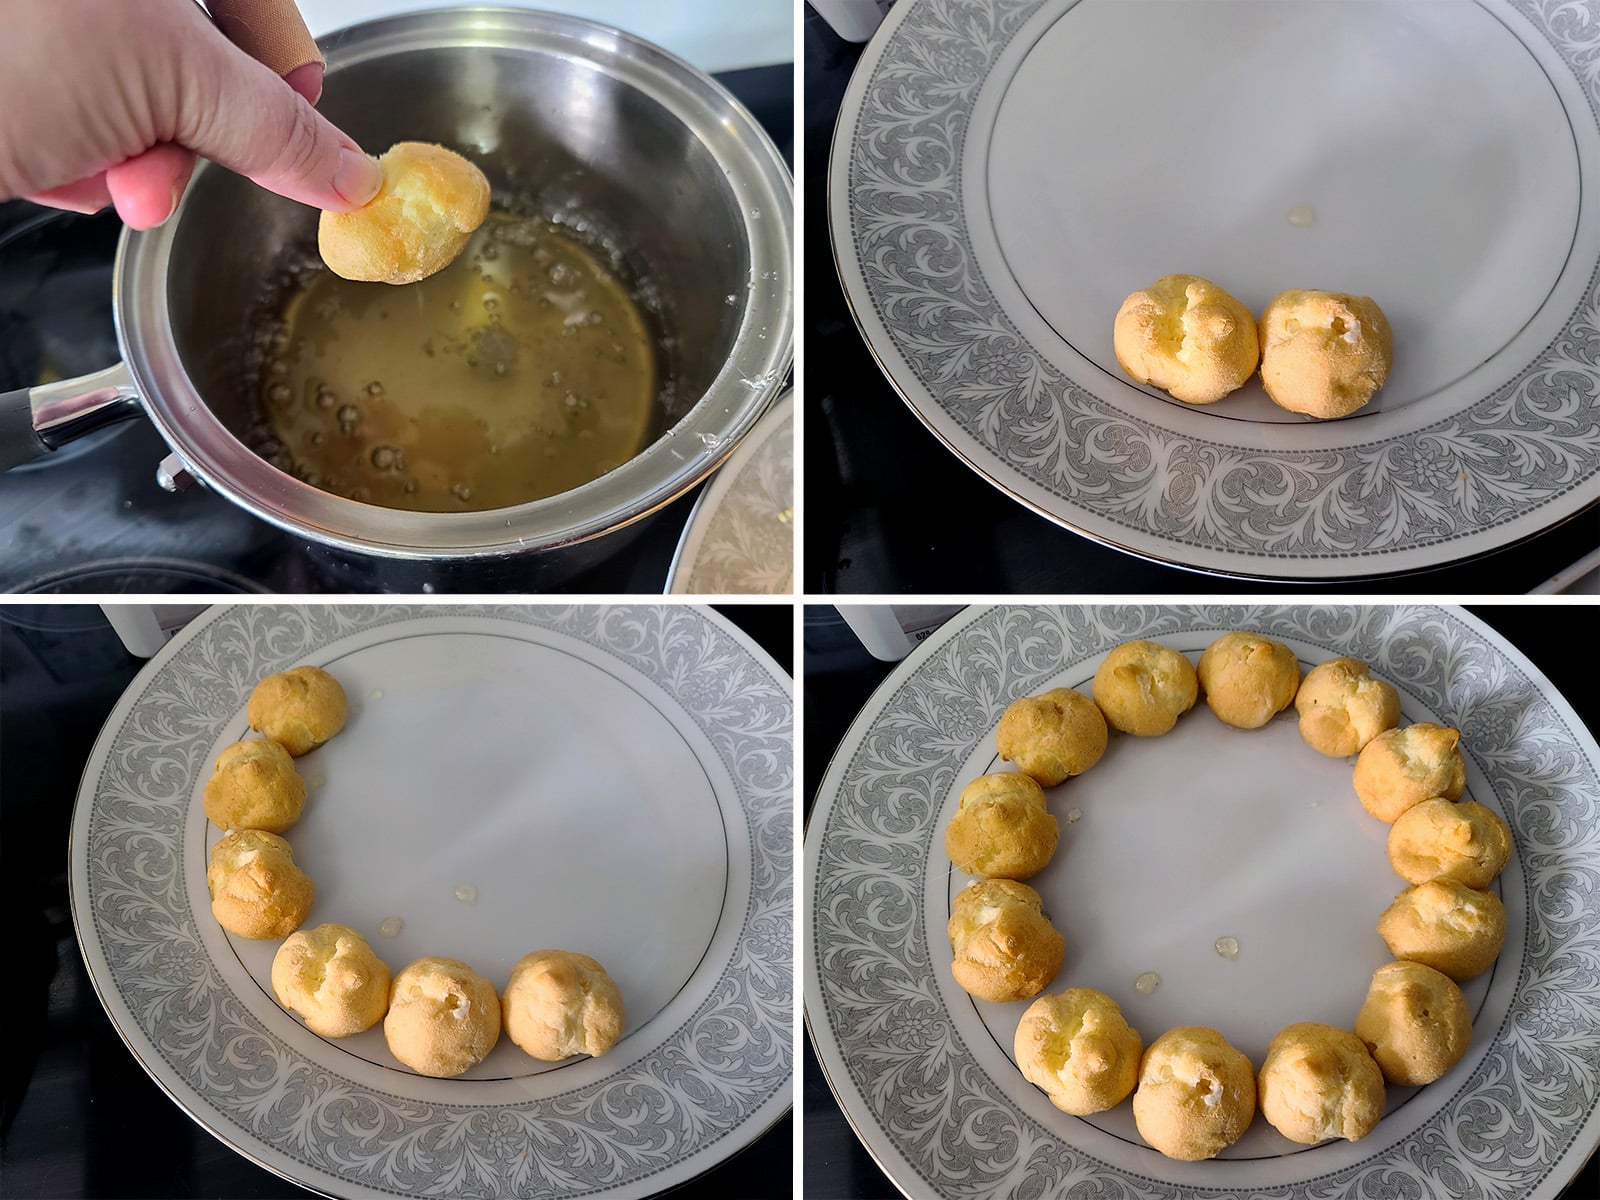 A 4 part image showing a profiterole dipped in caramel, stuck to a plate, and more added to make a circle.